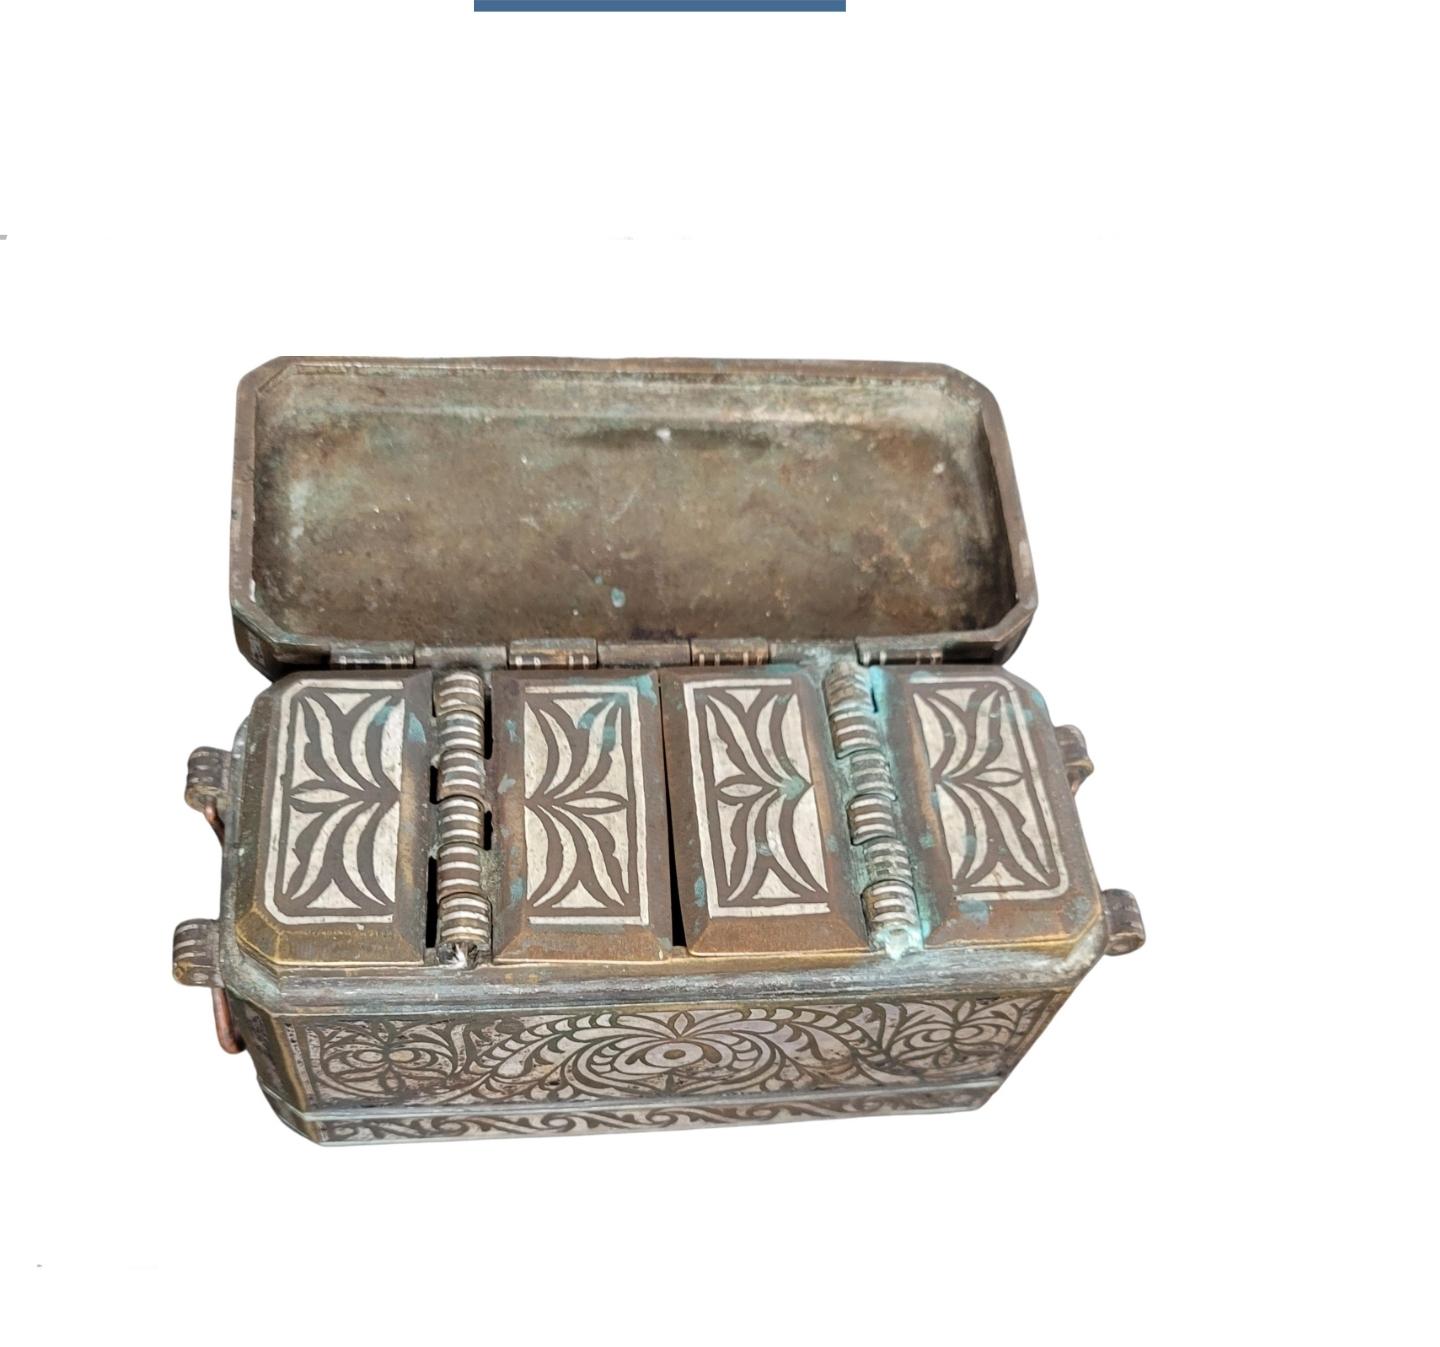 A scarce fine quality antique silver-inlaid solid brass betel nut box (Lutuan), dating to the second half of the 19th / early 20th century, hand-crafted in Mindanao, Philippines.

Boxes such as this were used to store the areca nut (also known as